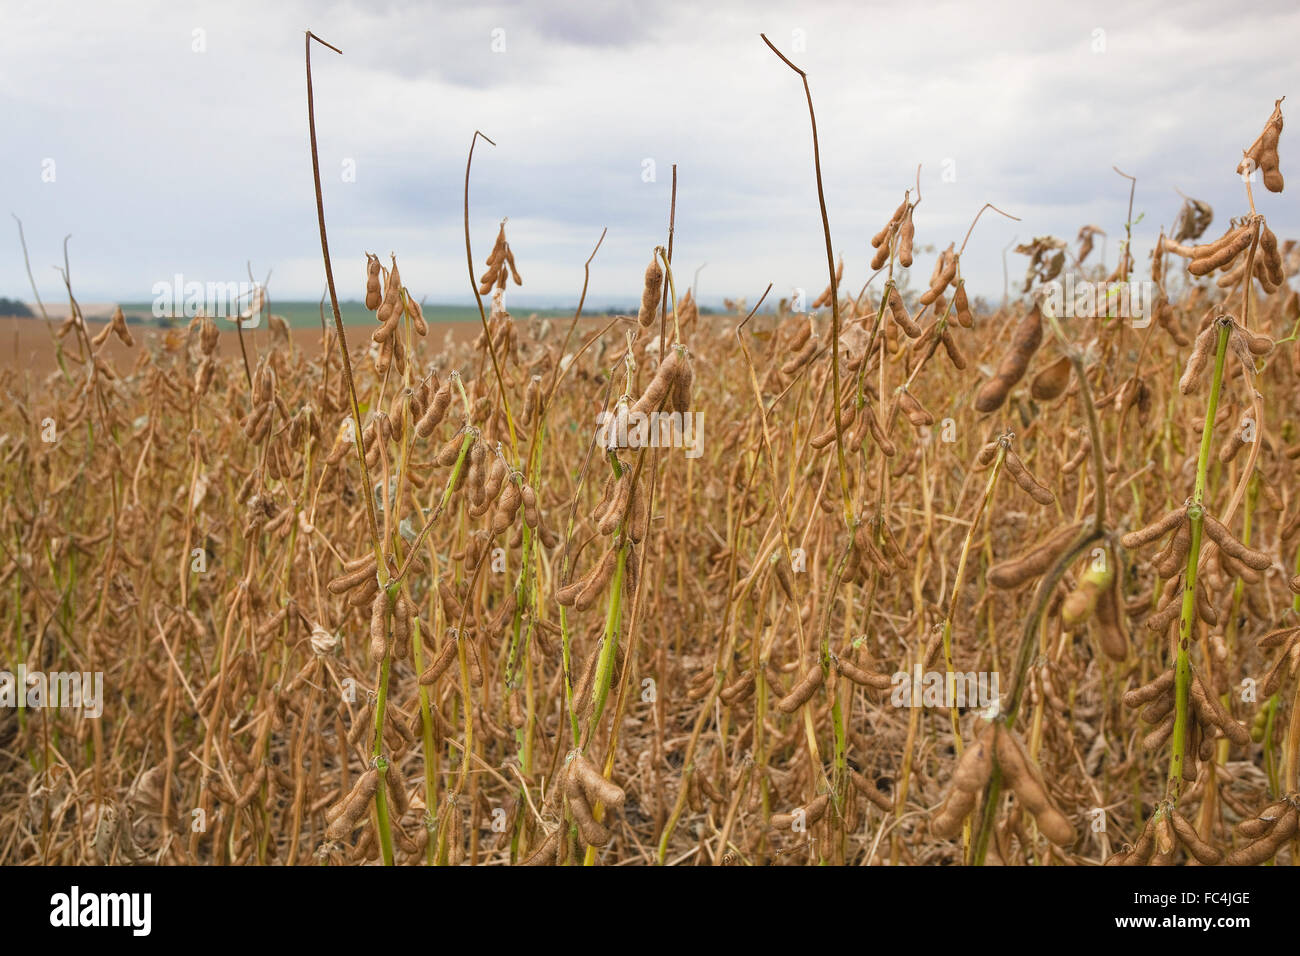 Pods plantation ready to harvest soybeans in rural Stock Photo